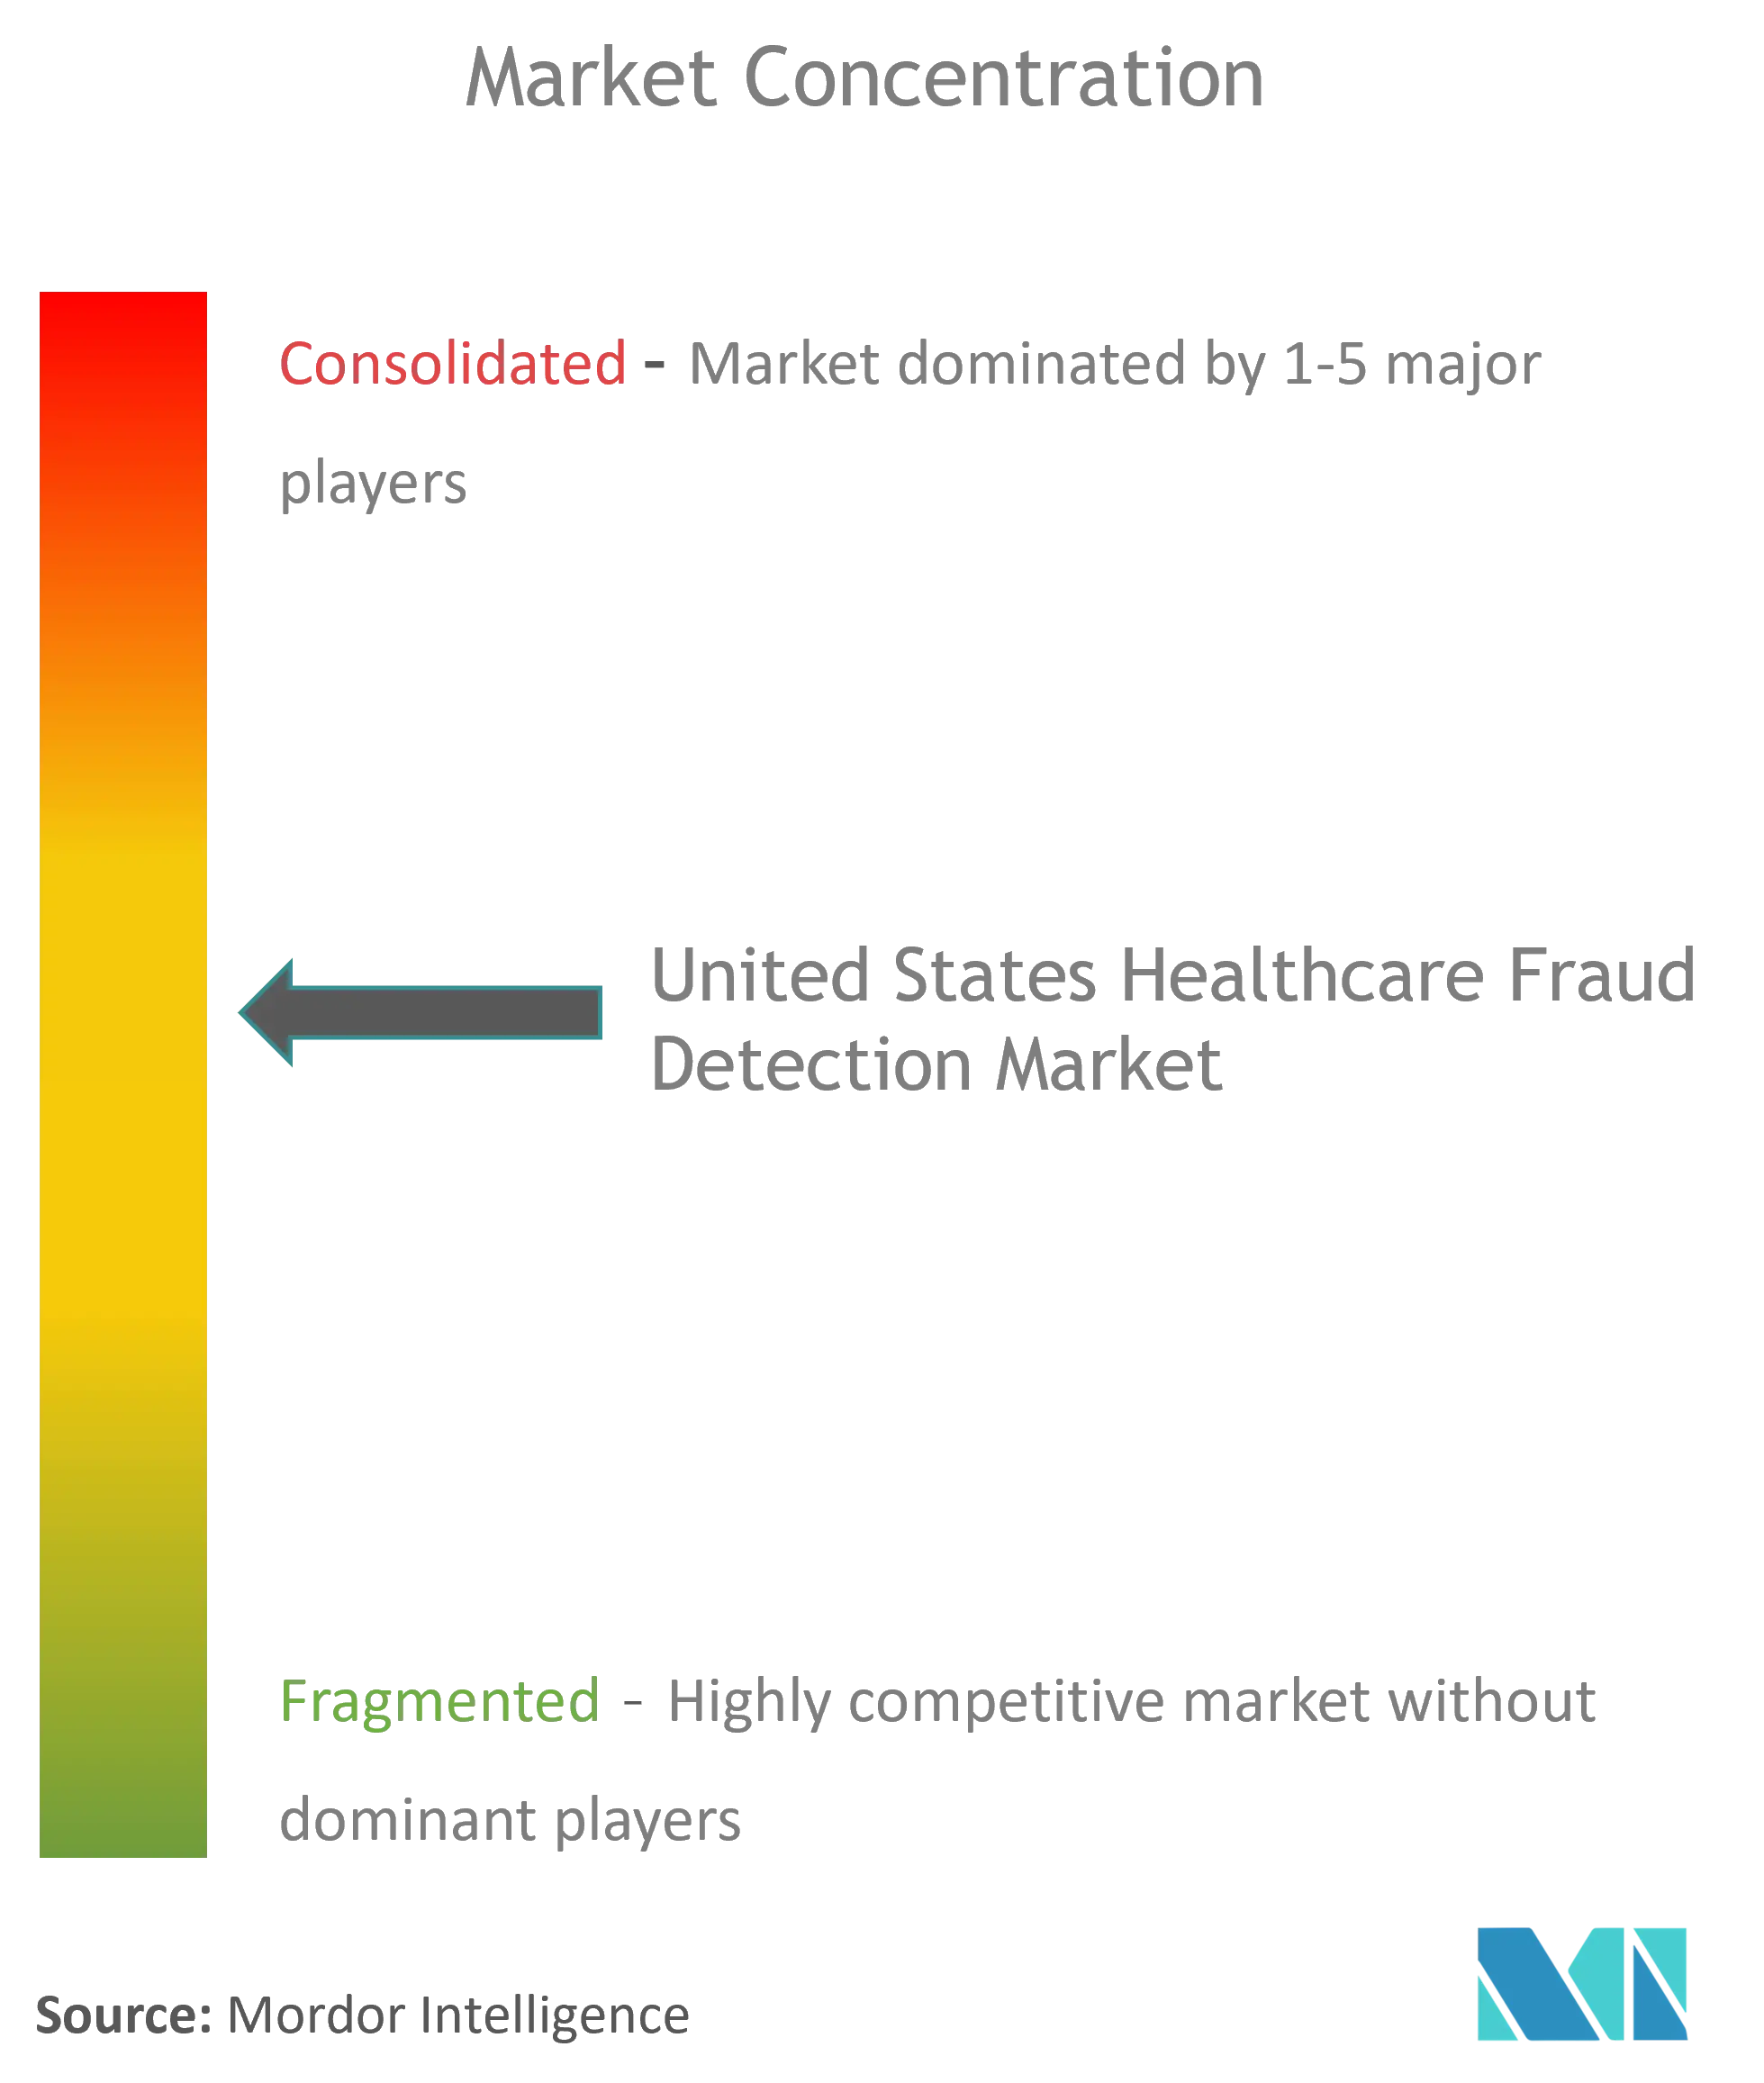 United States Healthcare Fraud Detection Market Concentration